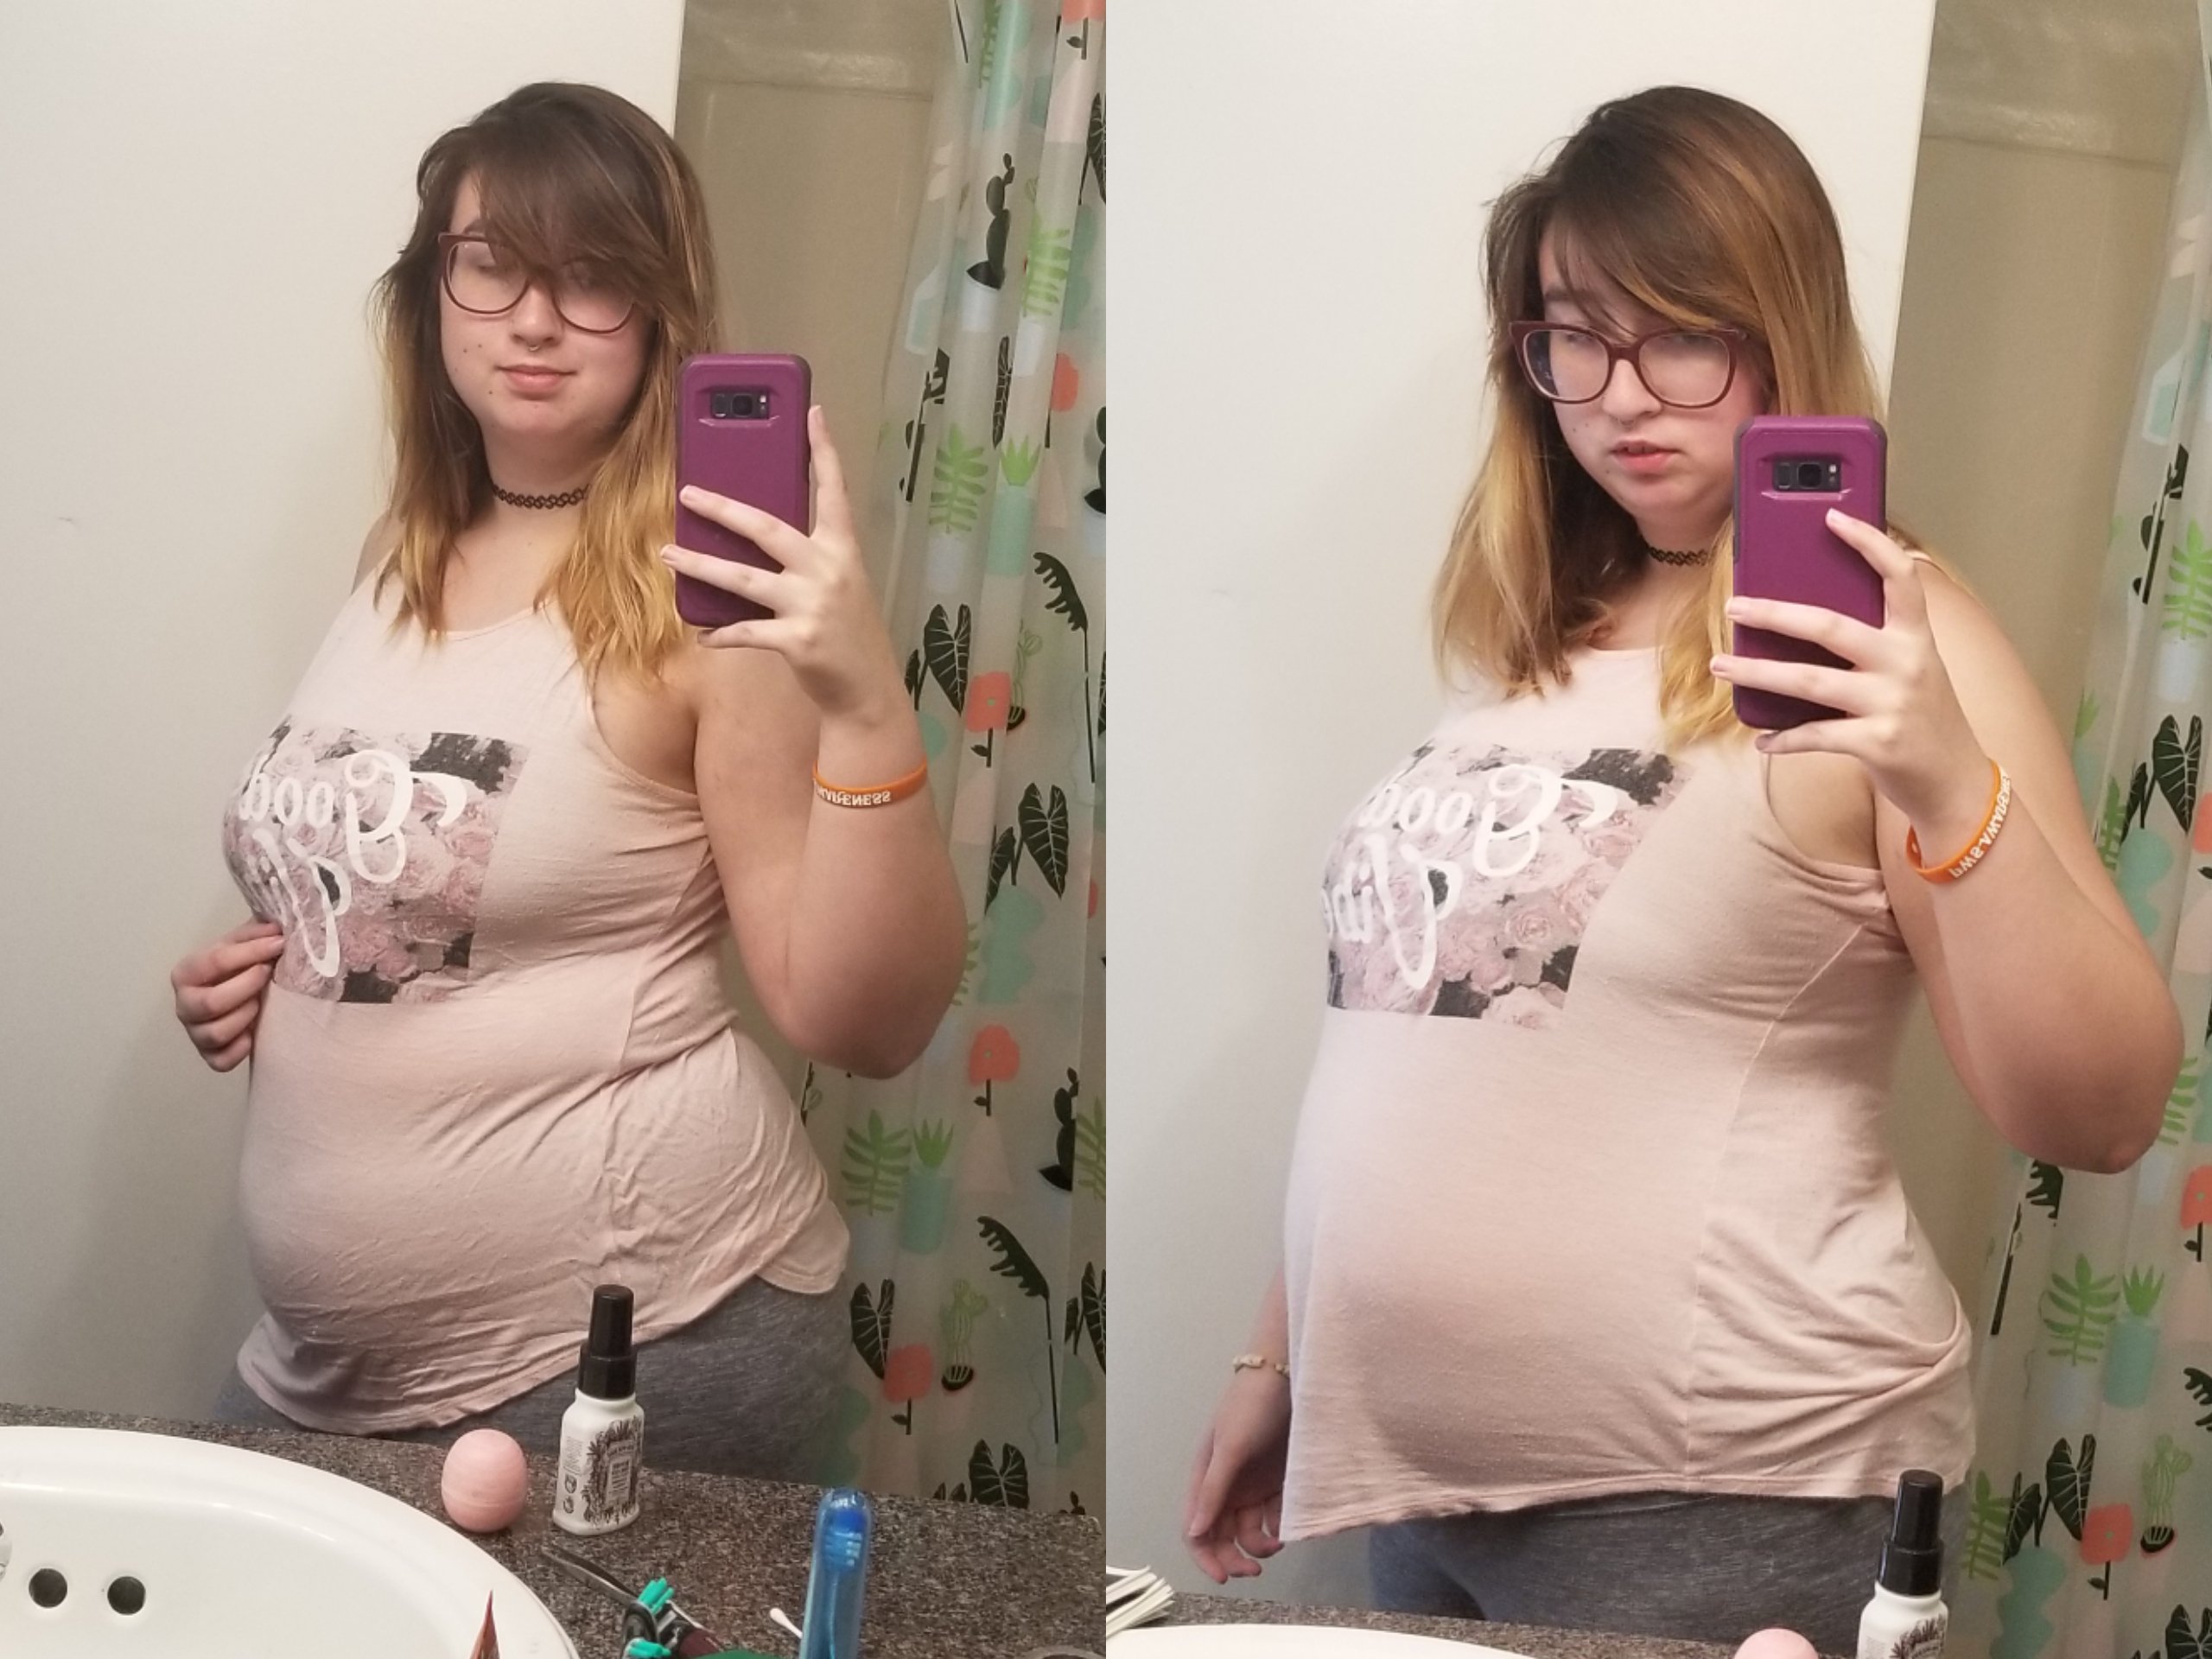 Before and after a stuffing of subs and soda! My belly ached so much :)